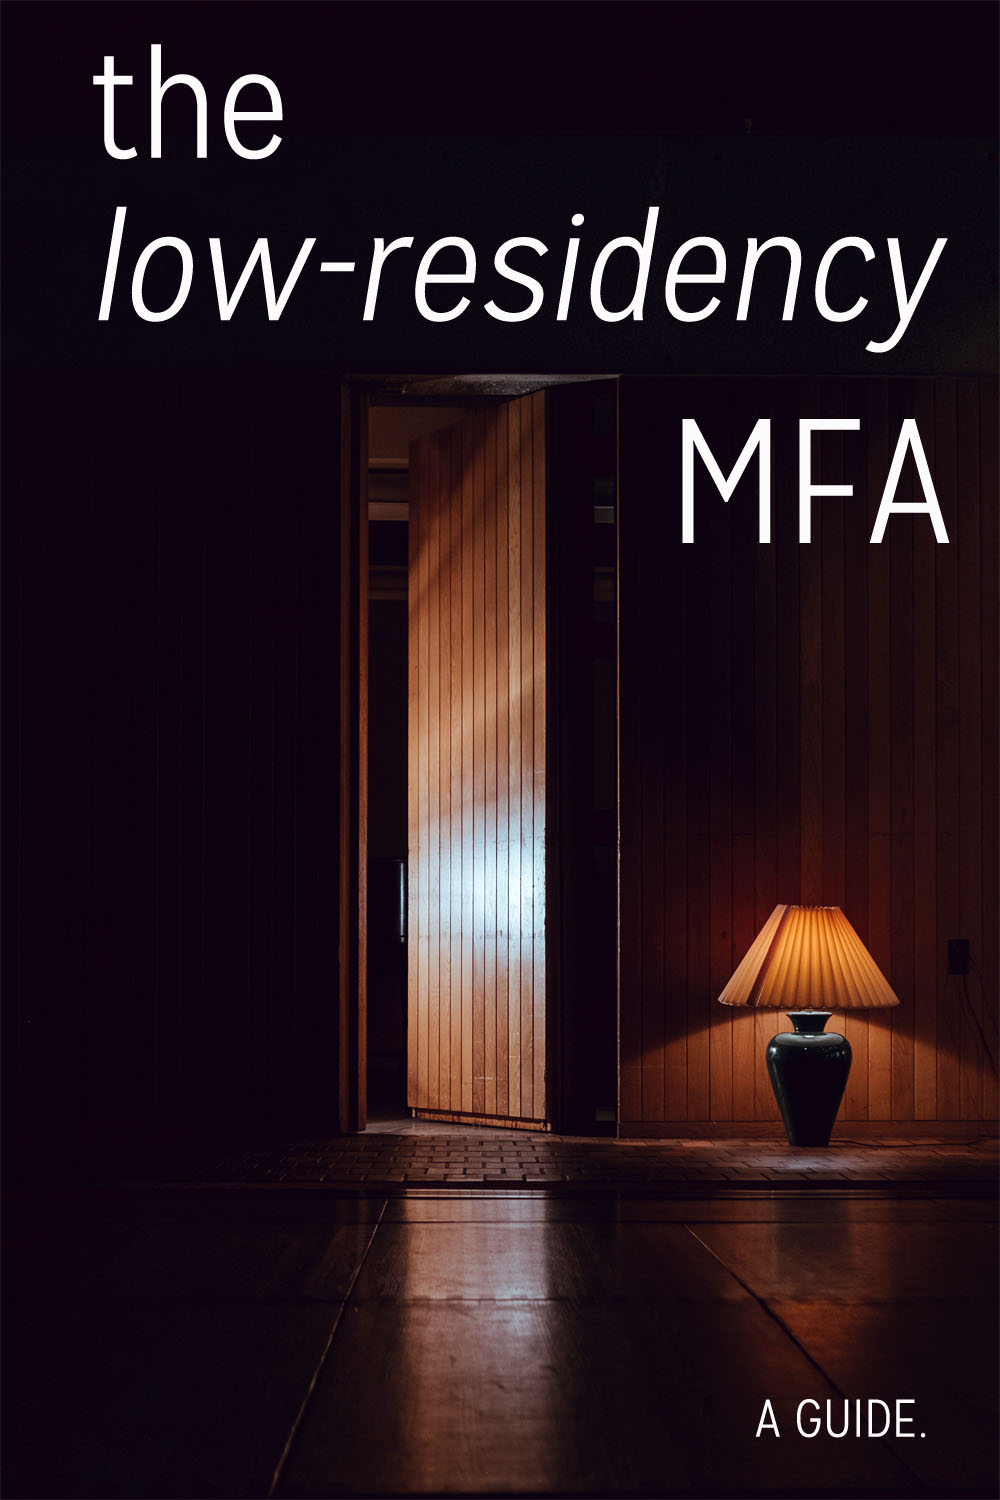 A Guide to Low-Residency MFAs